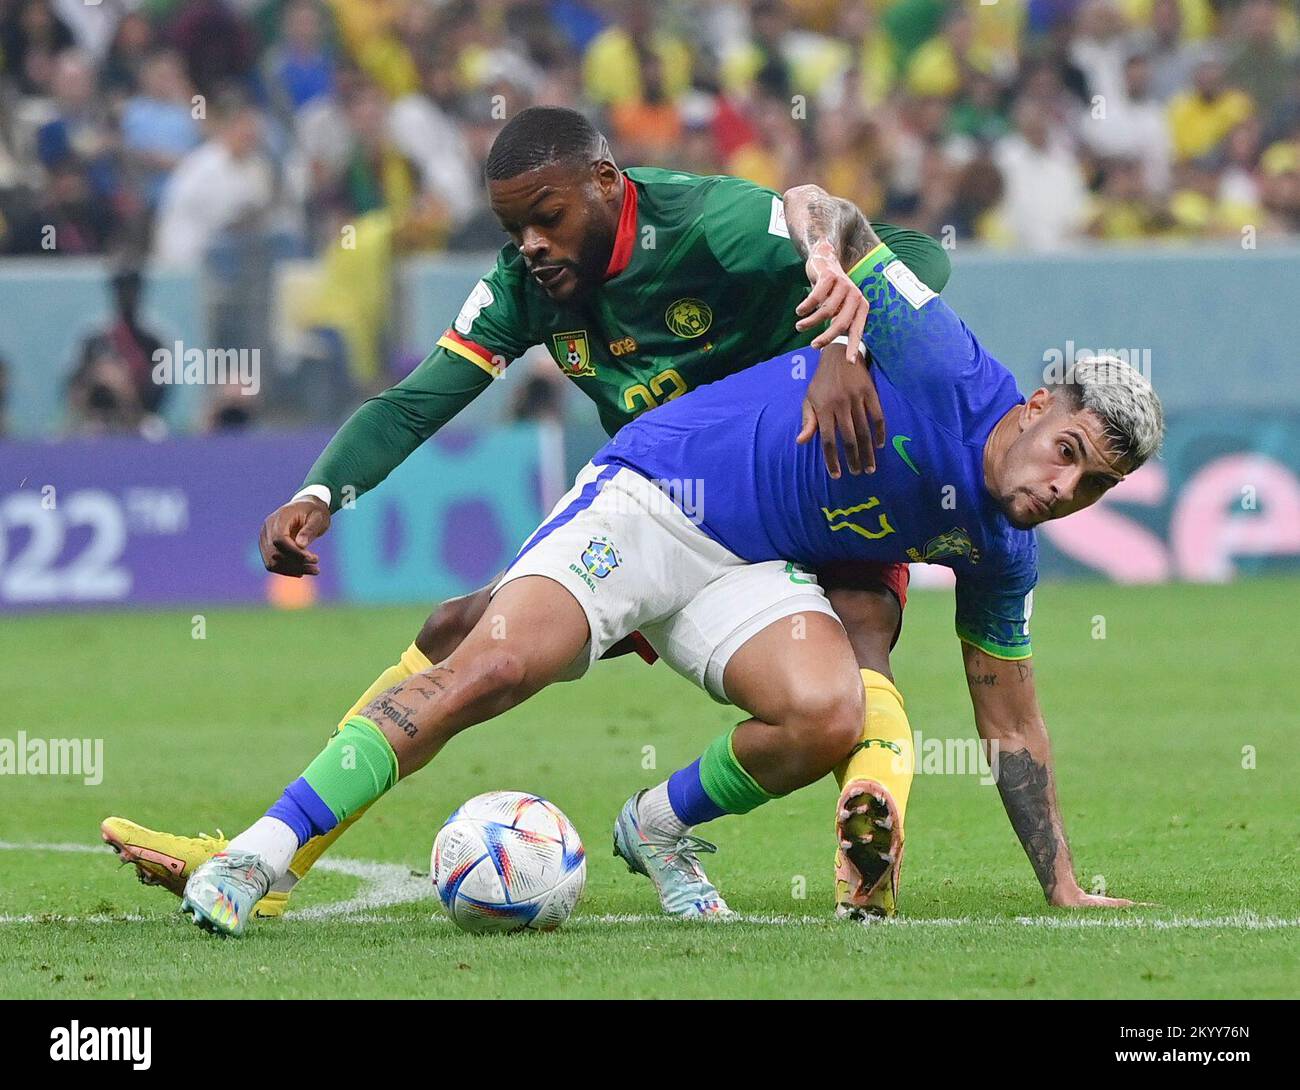 Lusail, Qatar. 2nd Dec, 2022. Bruno Guimaraes (R) of Brazil vies with Olivier Ntcham of Cameroon during their Group G match at the 2022 FIFA World Cup at Lusail Stadium in Lusail, Qatar, Dec. 2, 2022. Credit: Chen Cheng/Xinhua/Alamy Live News Stock Photo